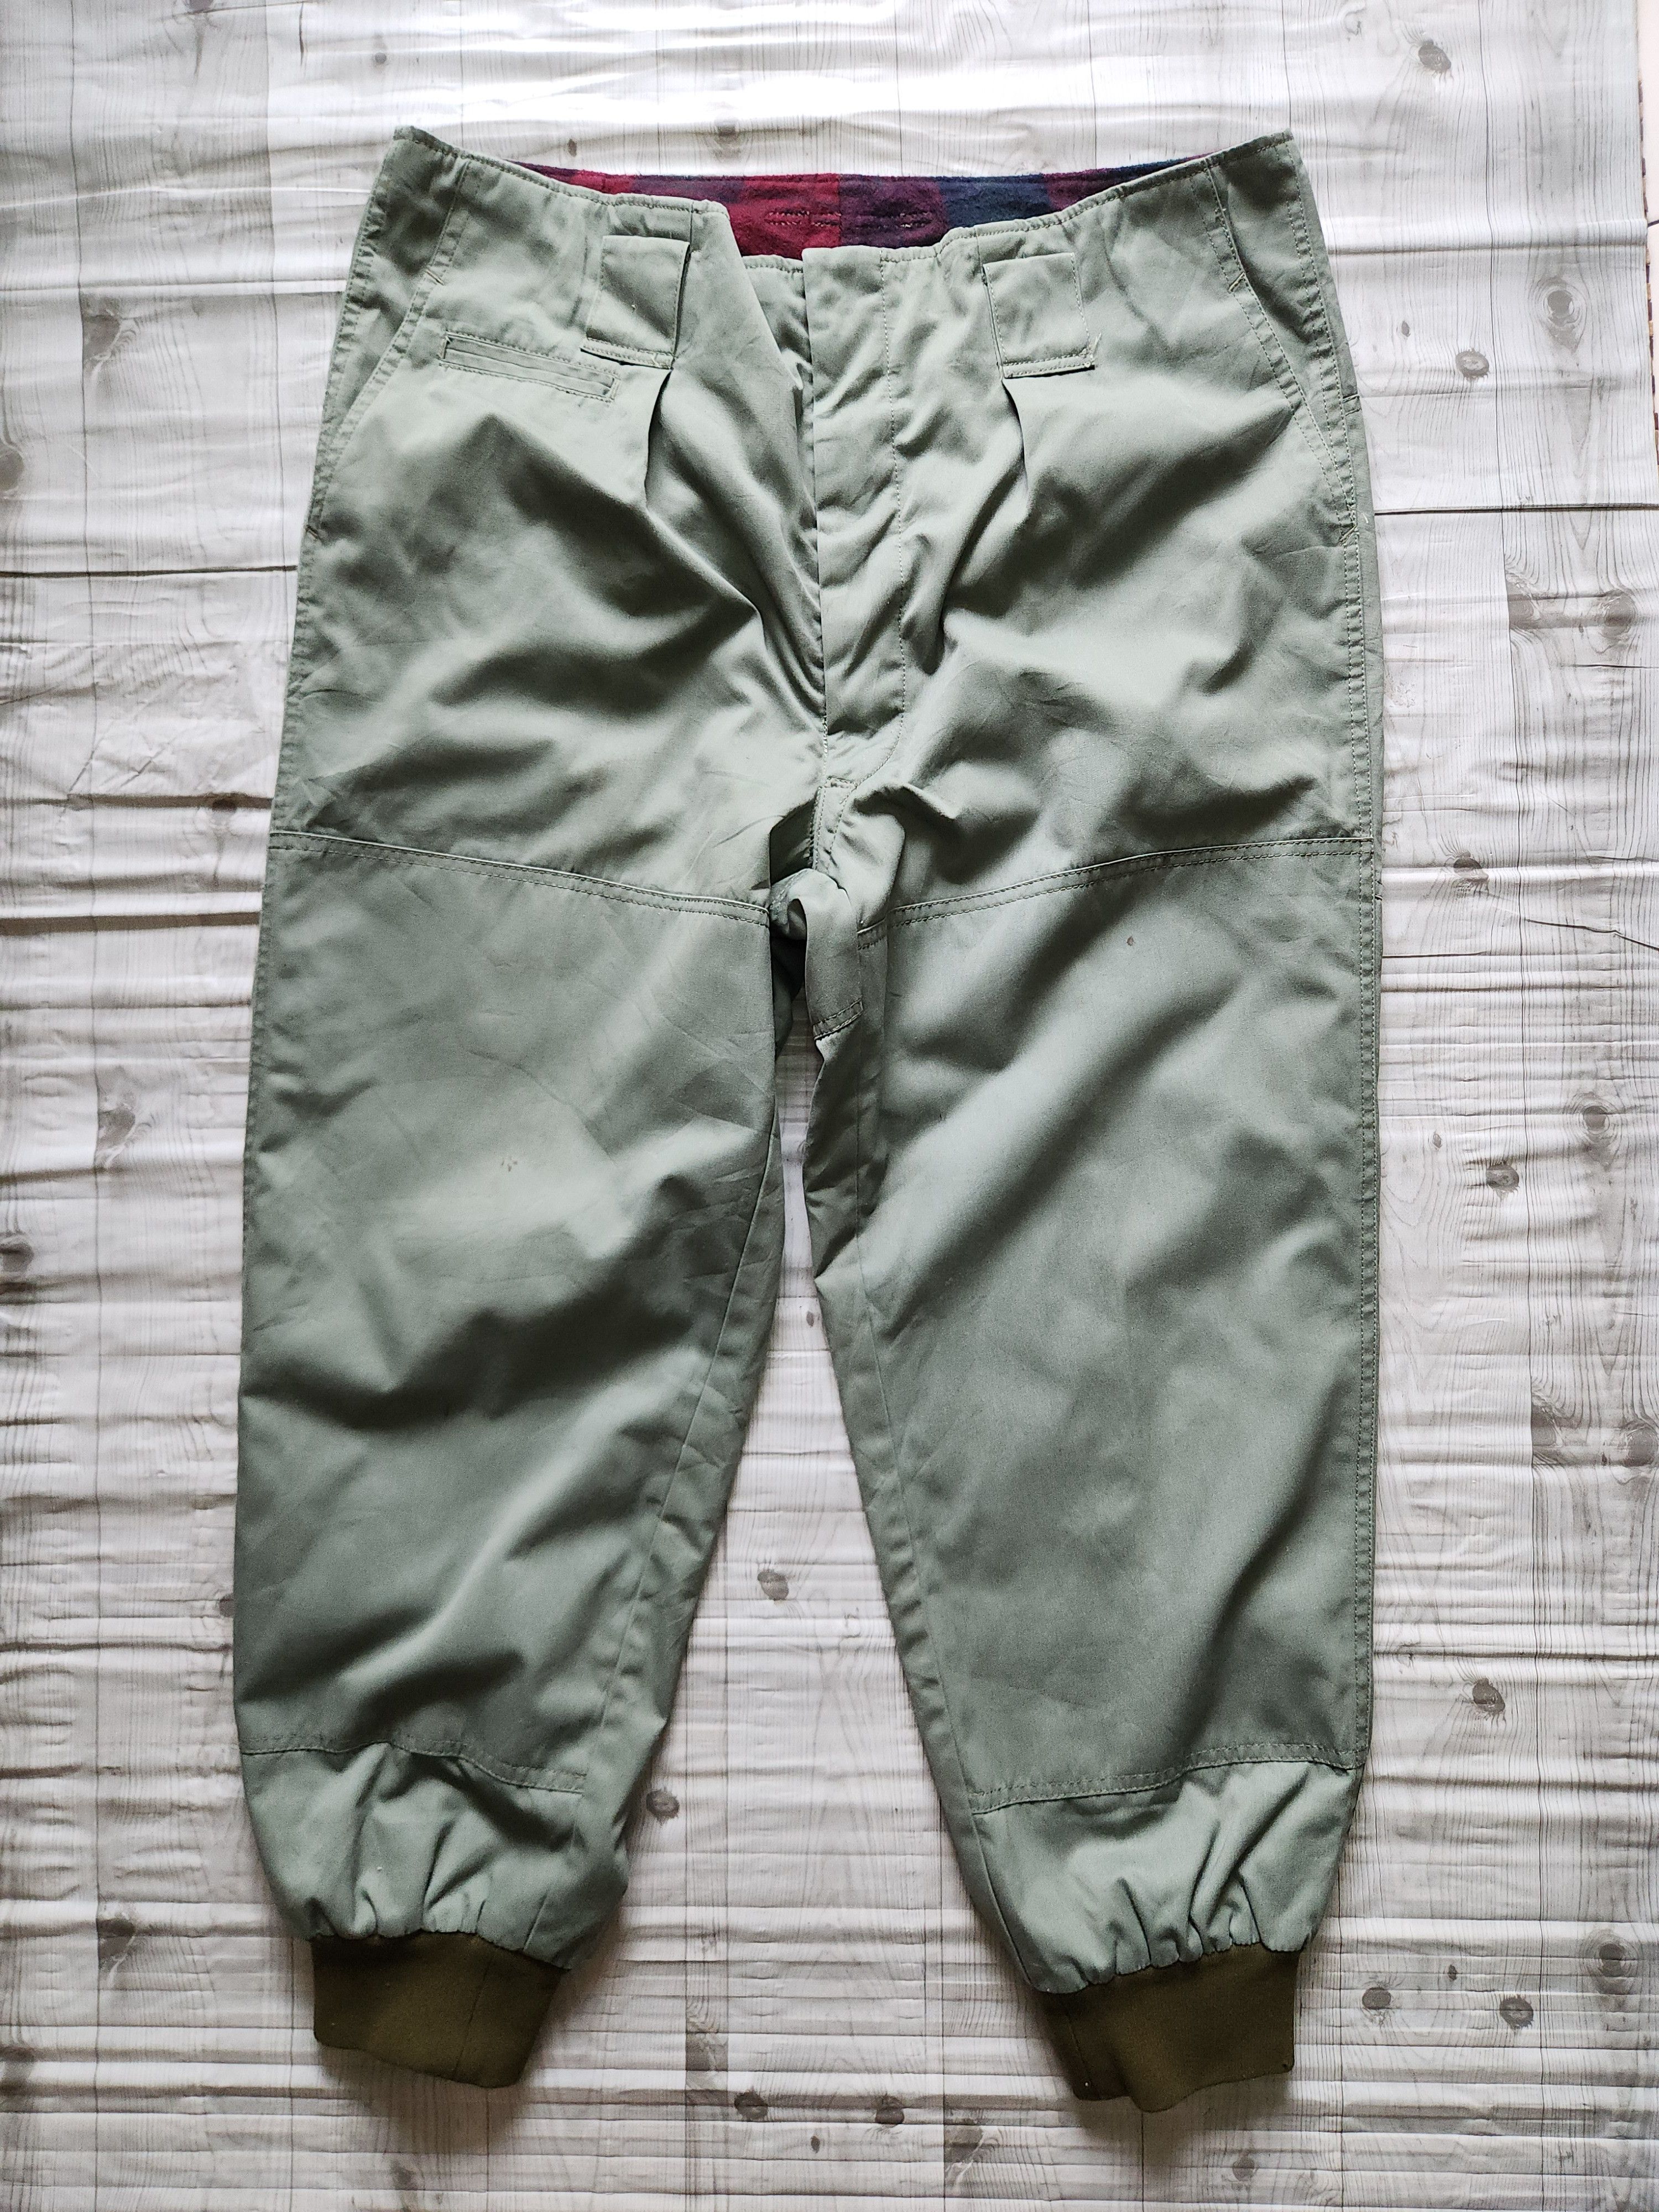 Outdoor Style Go Out! - Vintage Shooting Wear Pants Aster USA - 1